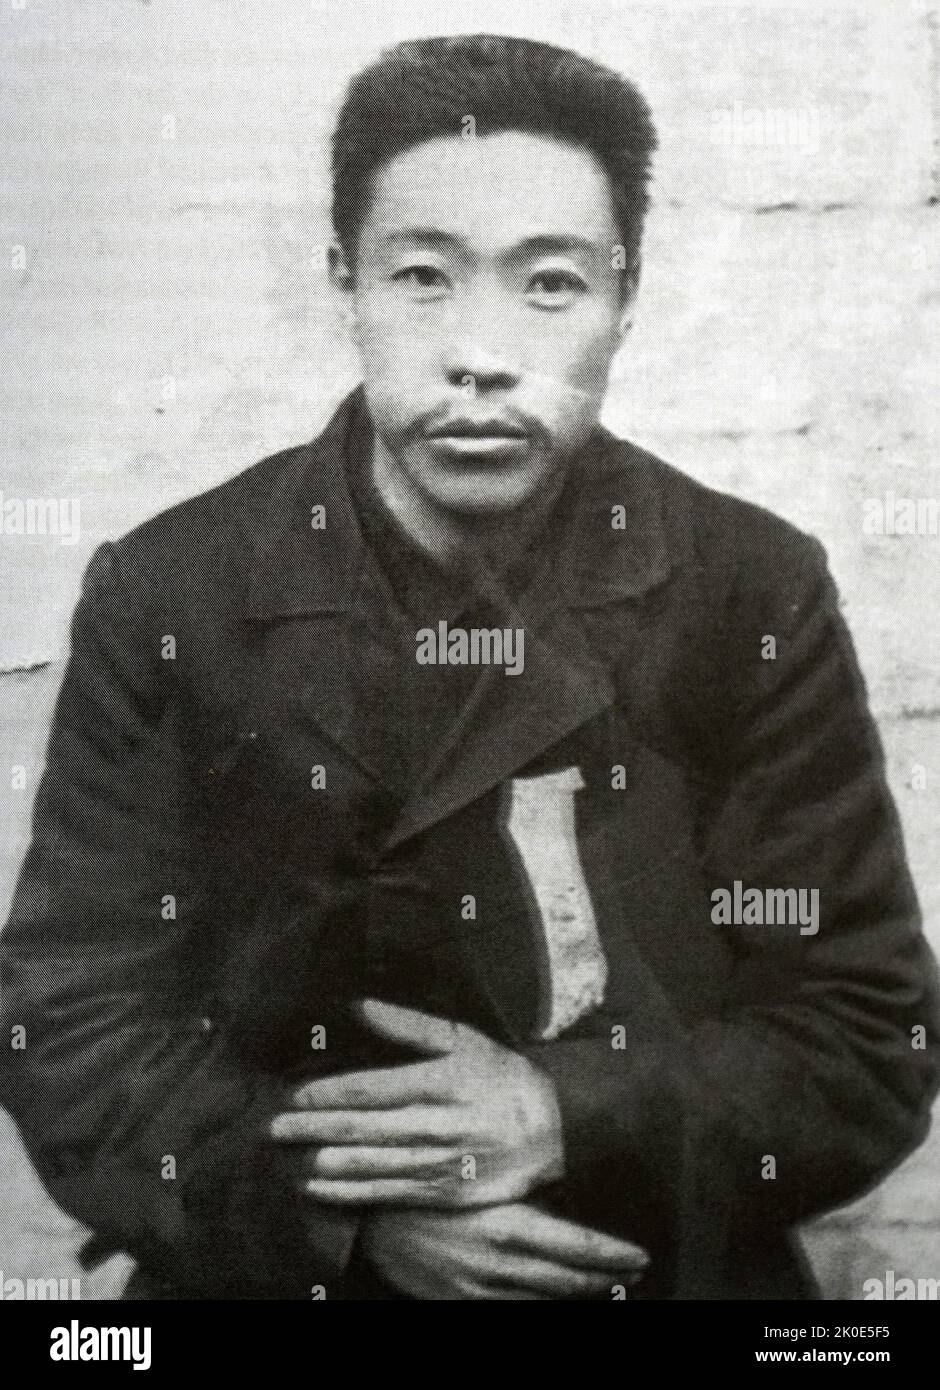 An Jung-geun, (1879 - 1910), Korean-independence activist, and pan-Asianist. On 26 October 1909, he assassinated Prince Ito Hirobumi, a four-time Prime Minister of Japan, former Resident-General of Korea, and then President of the Privy Council of Japan, following the signing of the Eulsa Treaty, with Korea on the verge of annexation by Japan. He was imprisoned and later executed by Japanese authorities on 26 March 1910. Stock Photo